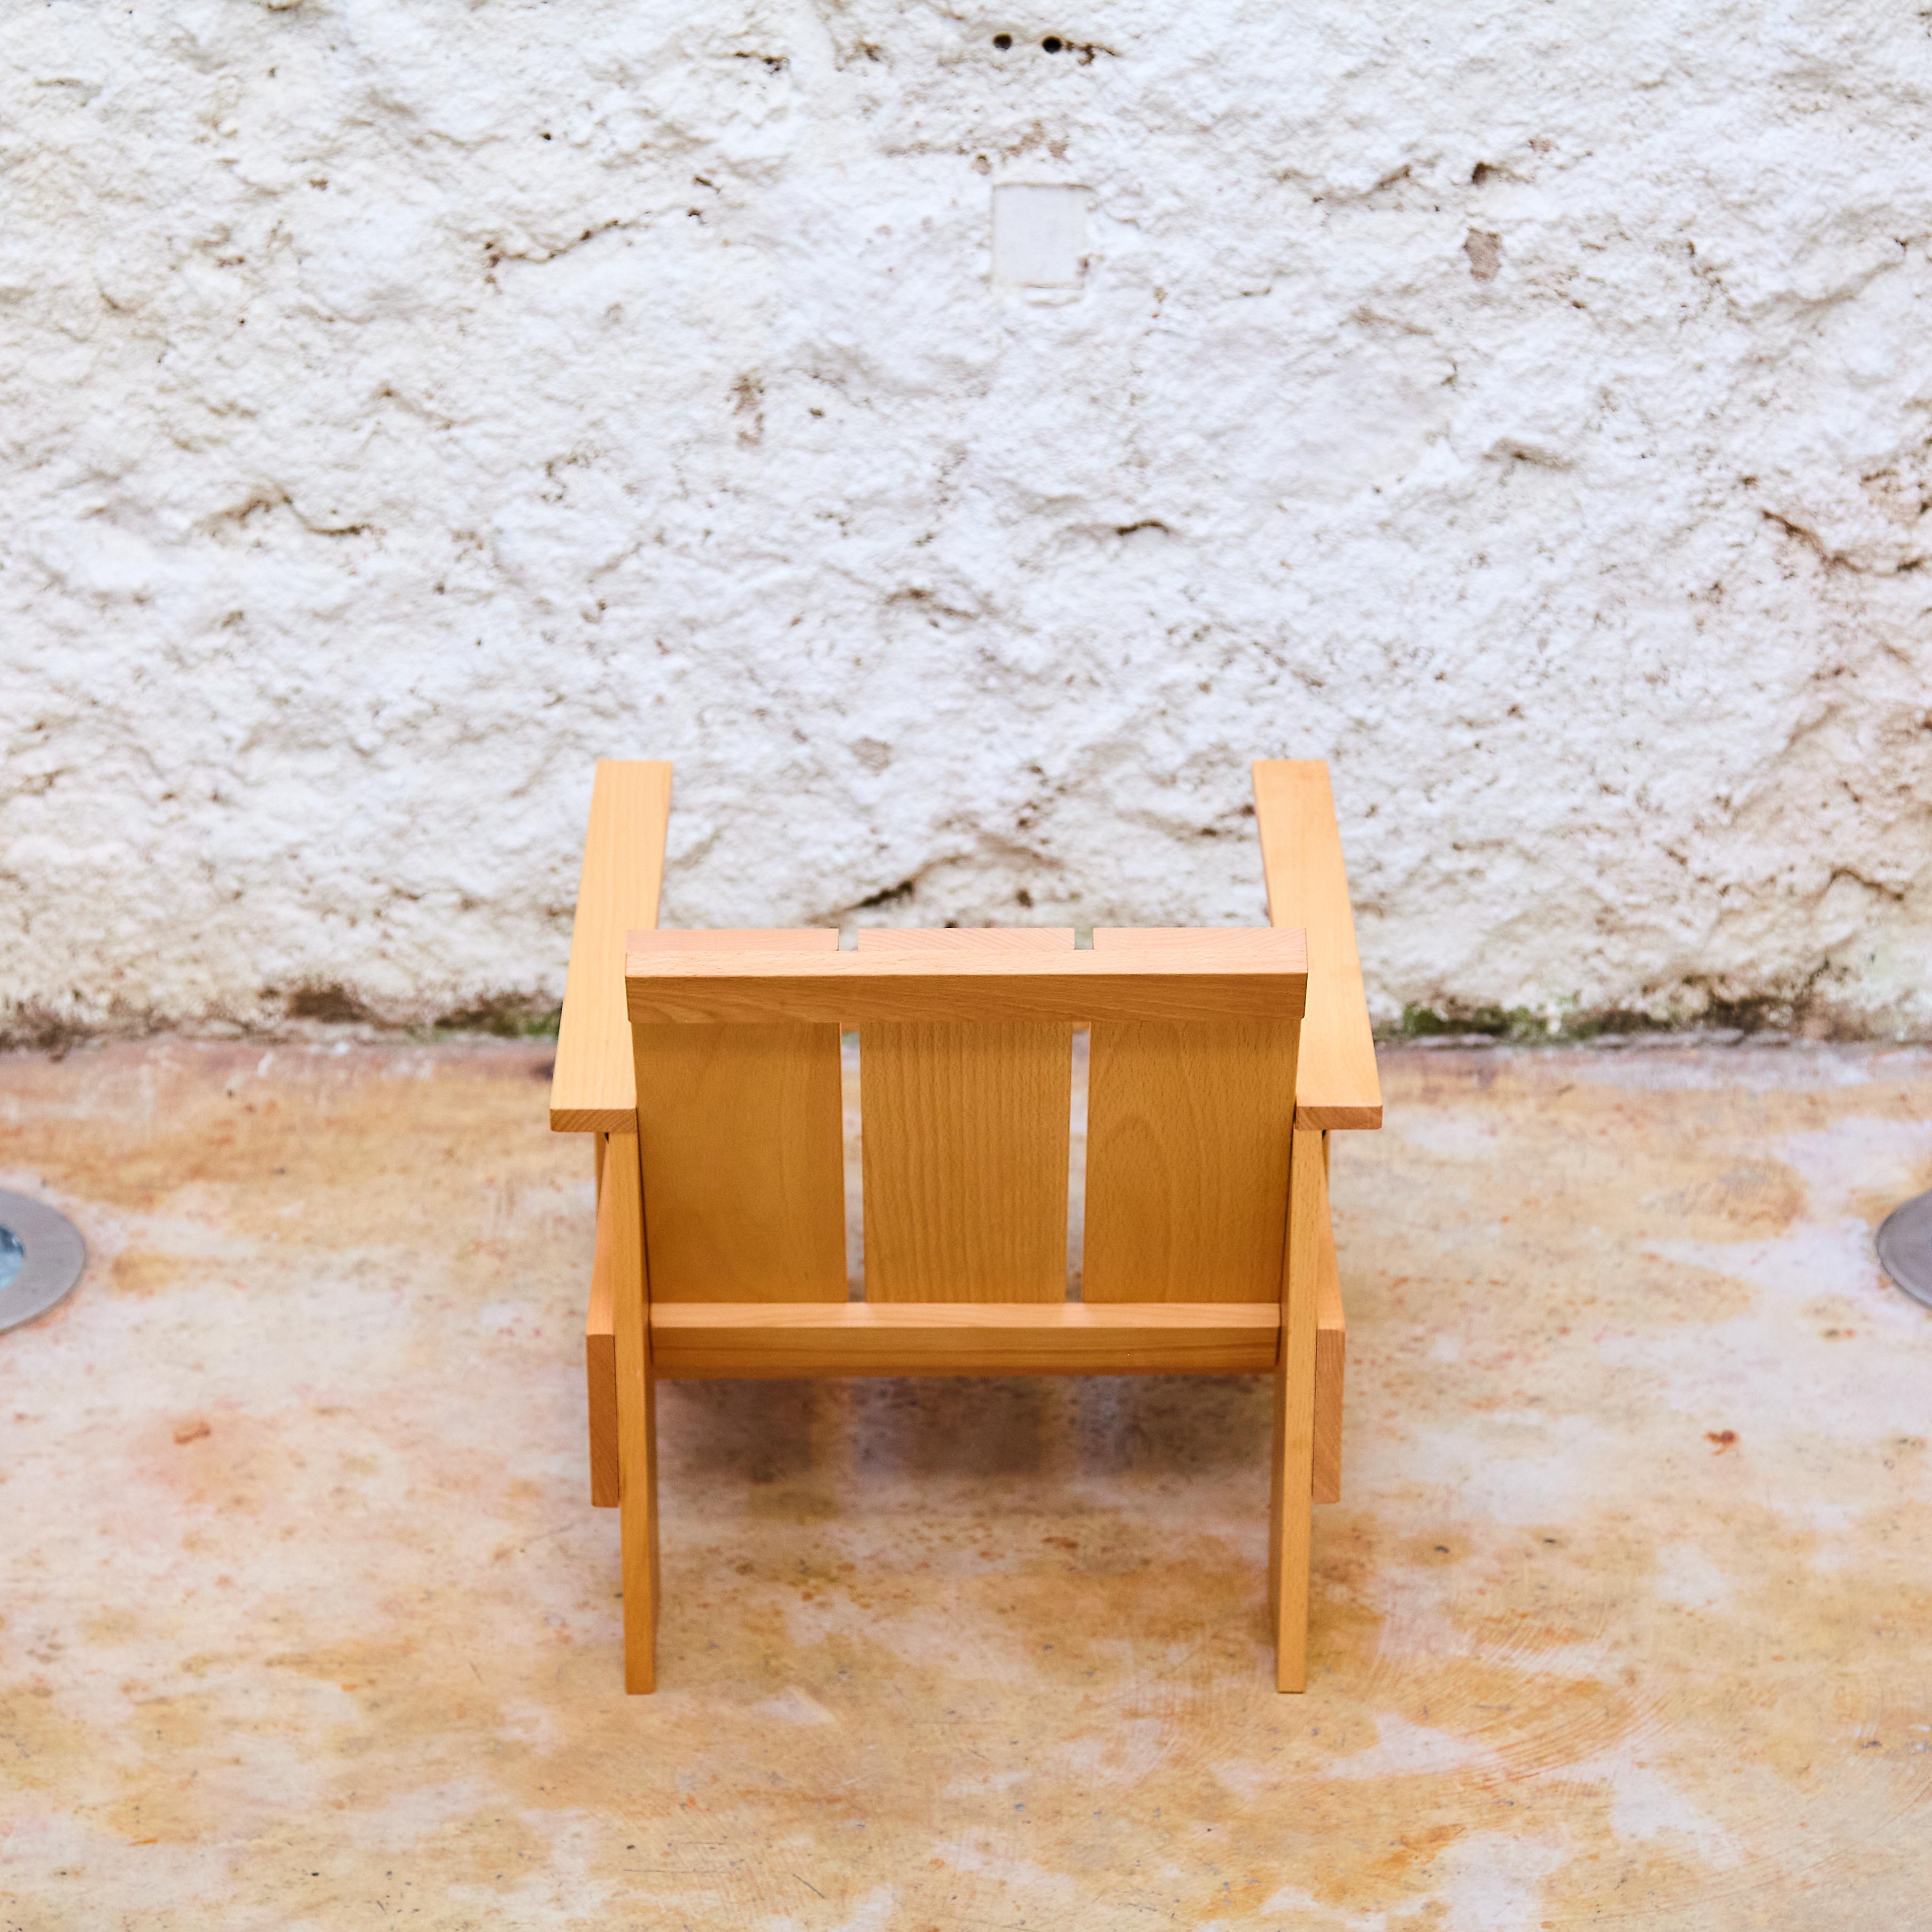 Contemporary Gerrit Rietveld Wood Child Armchair 'Crate' by Rietveld by Rietveld, circa 2005 For Sale